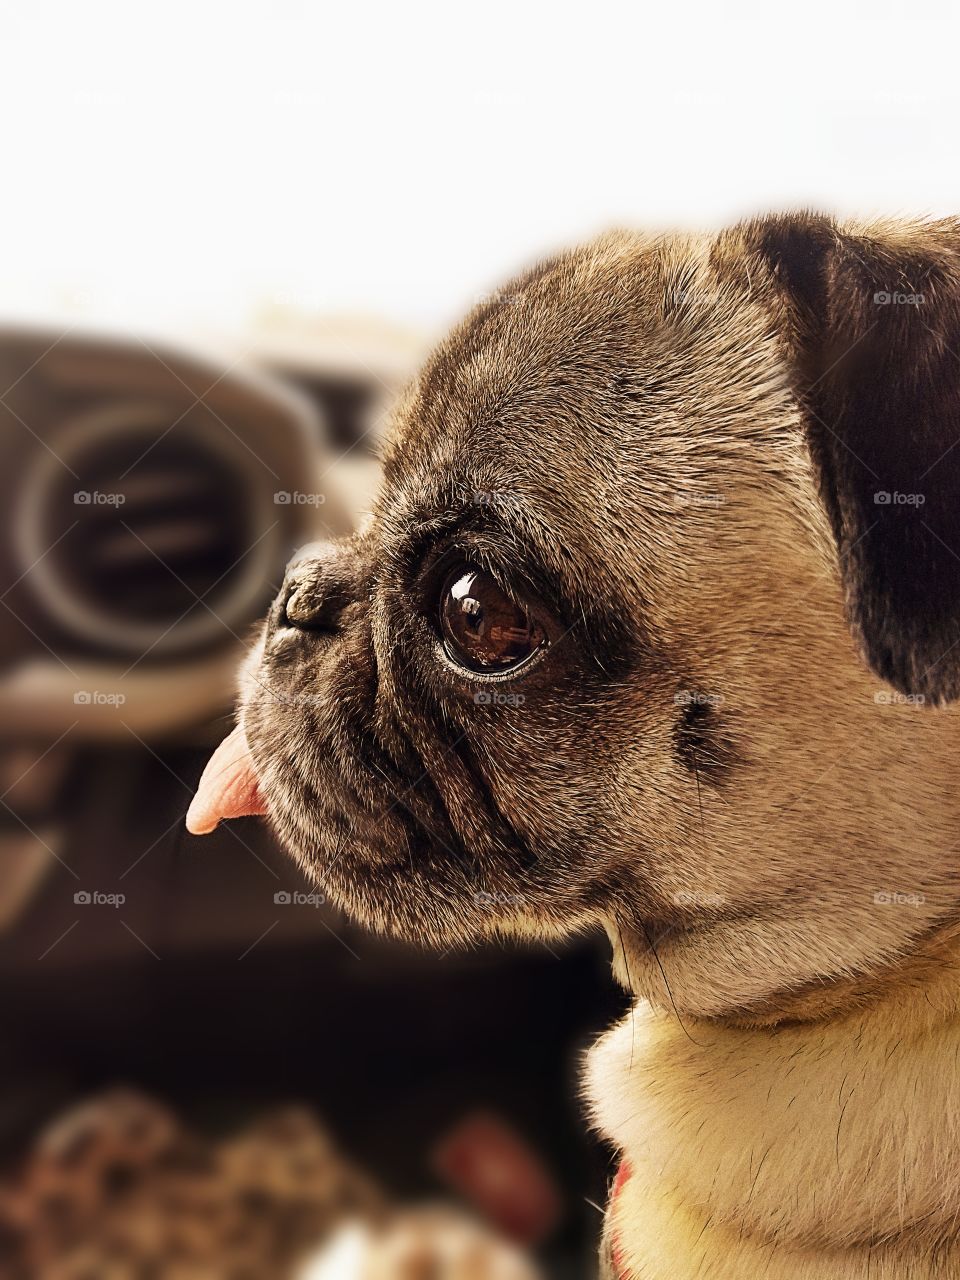 Pug, sitting front seat, looking around on a car ride